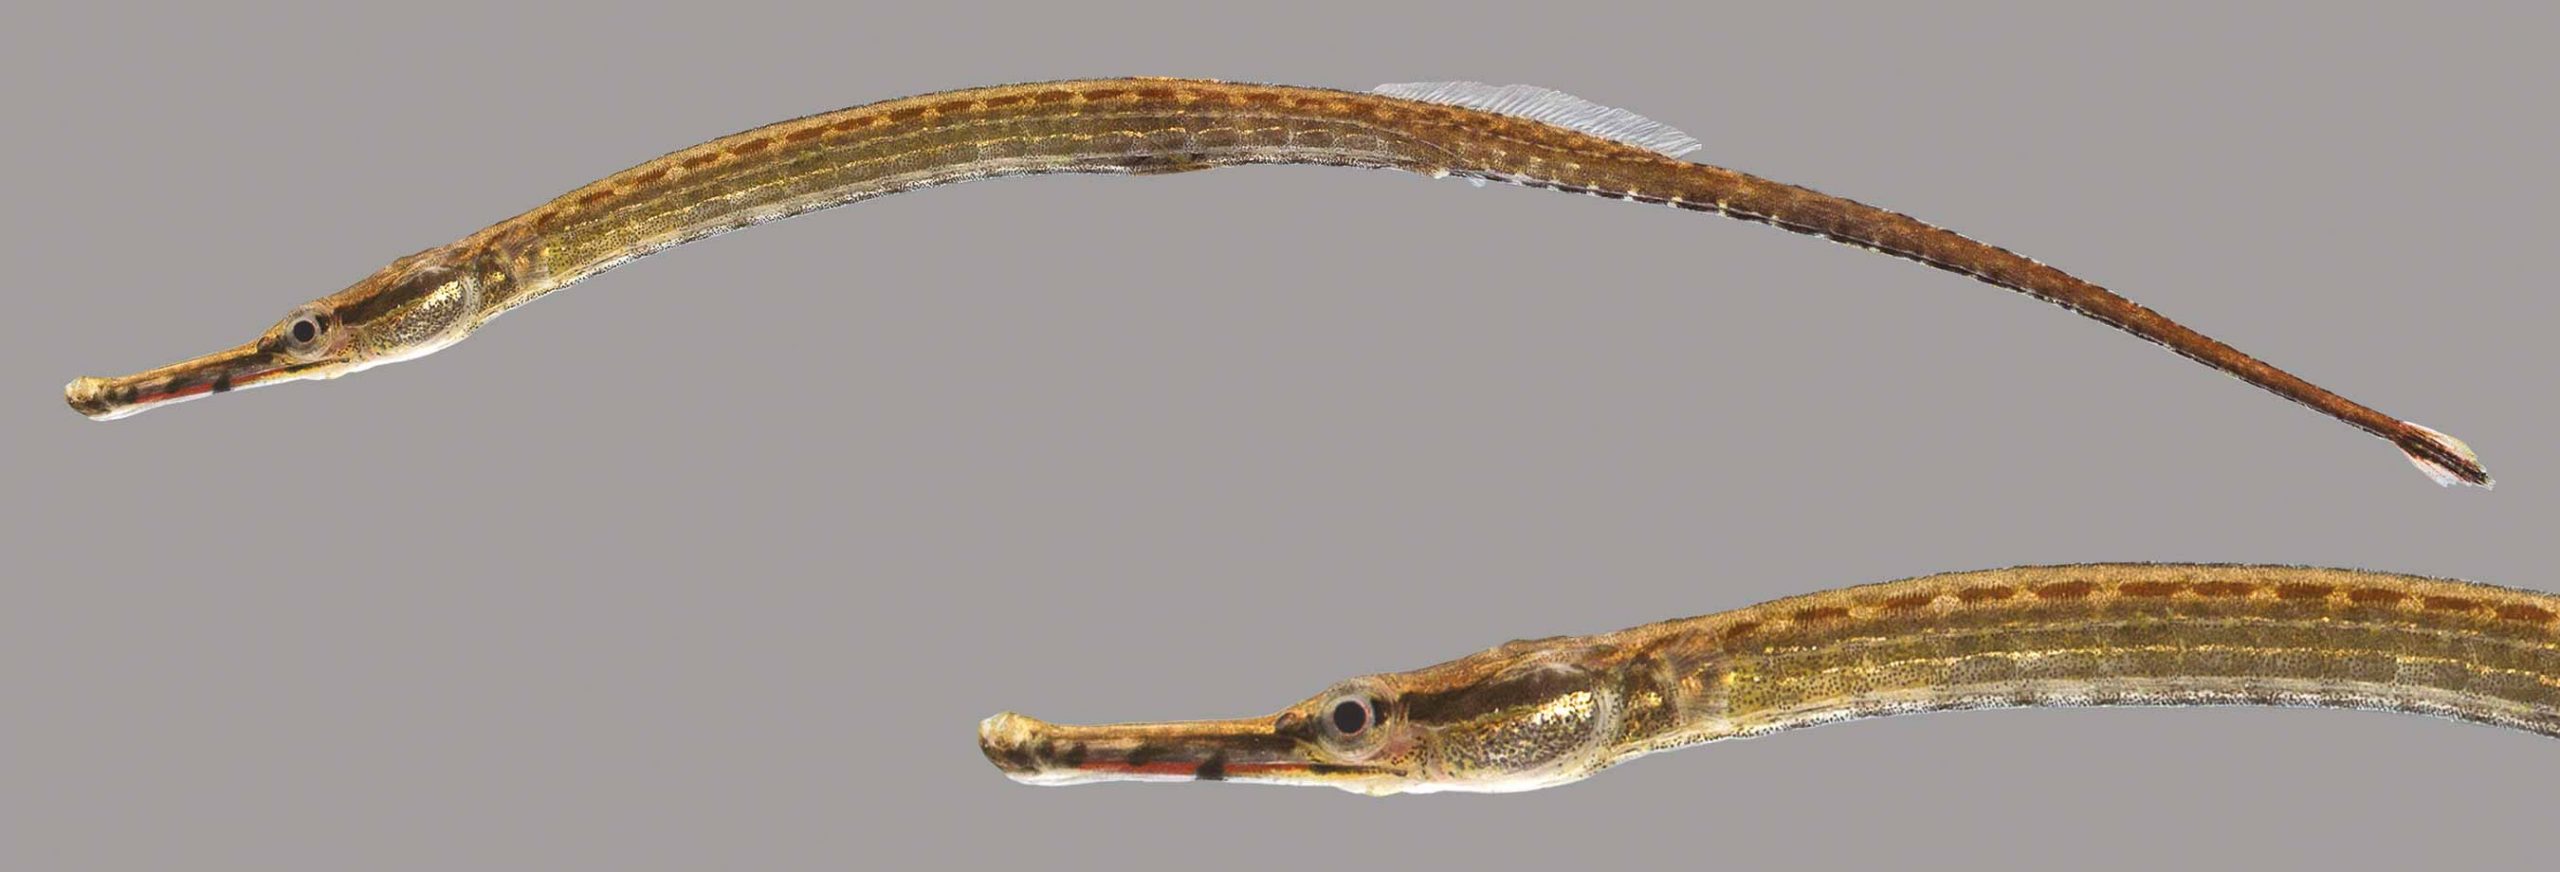 Lateral view of opossum pipefish